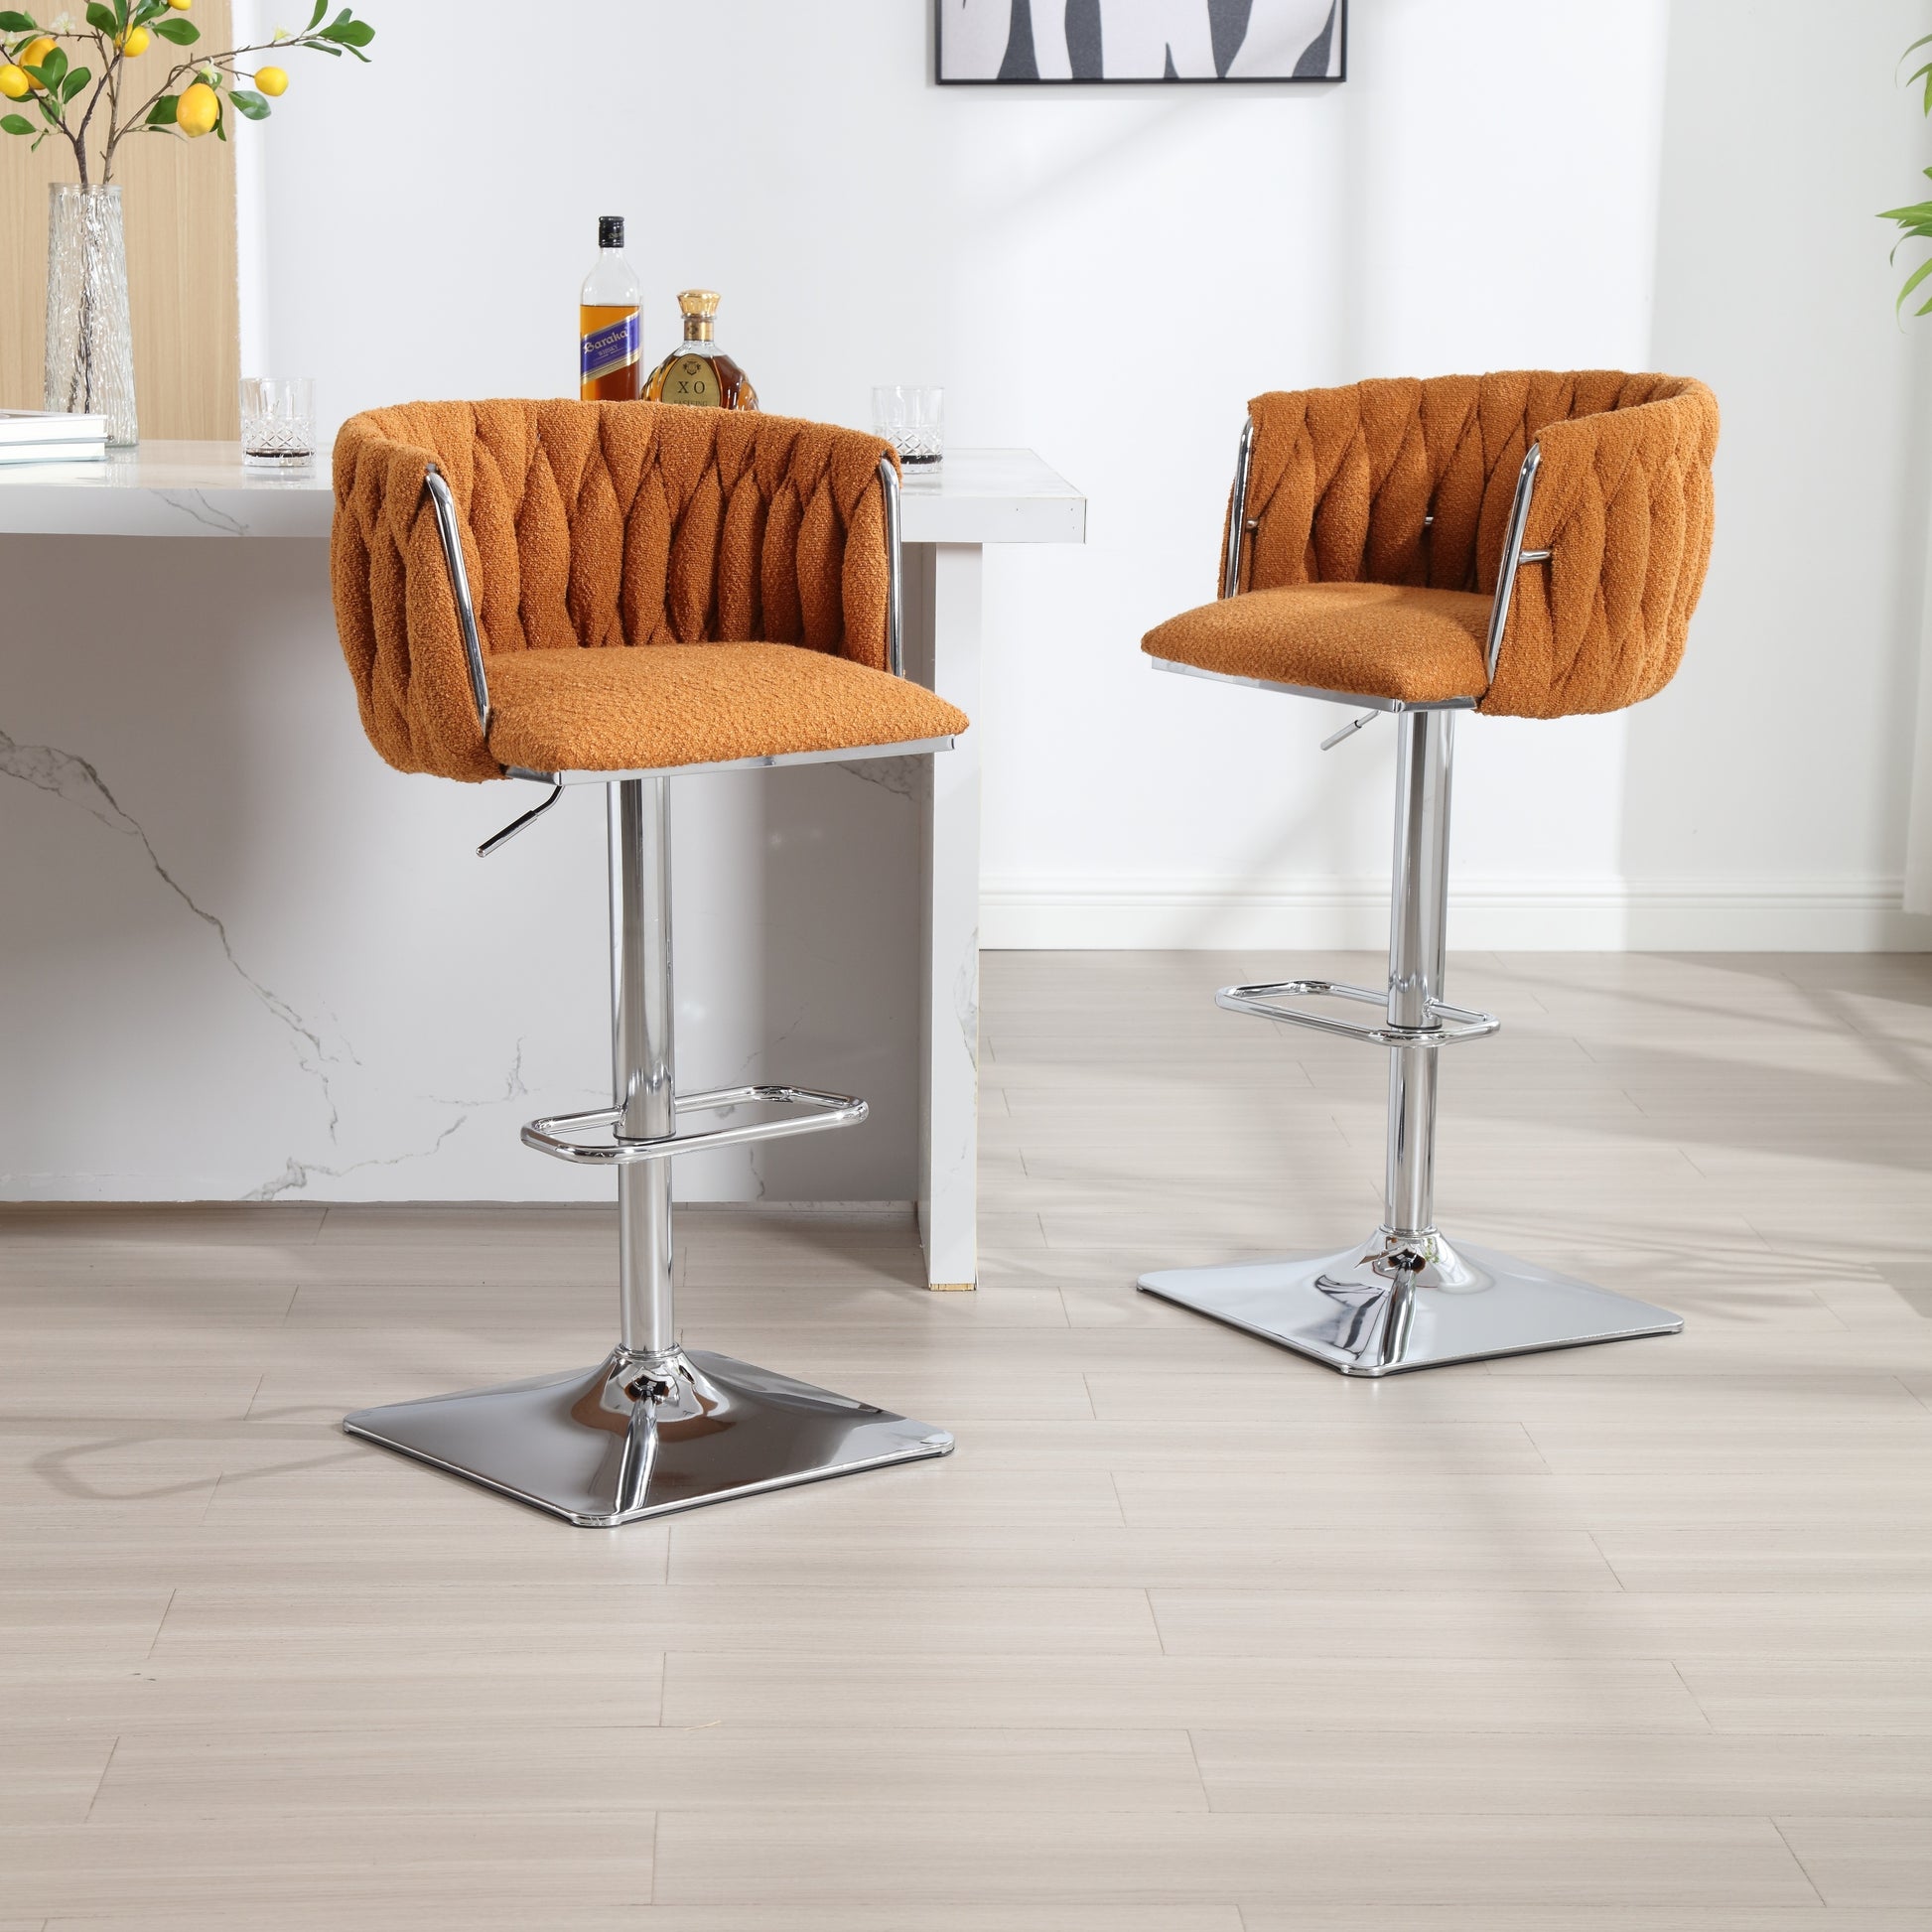 COOLMORE Vintage Bar Stools with Back and Footrest Counter Height Dining Chairs 2PC/SET - Enova Luxe Home Store